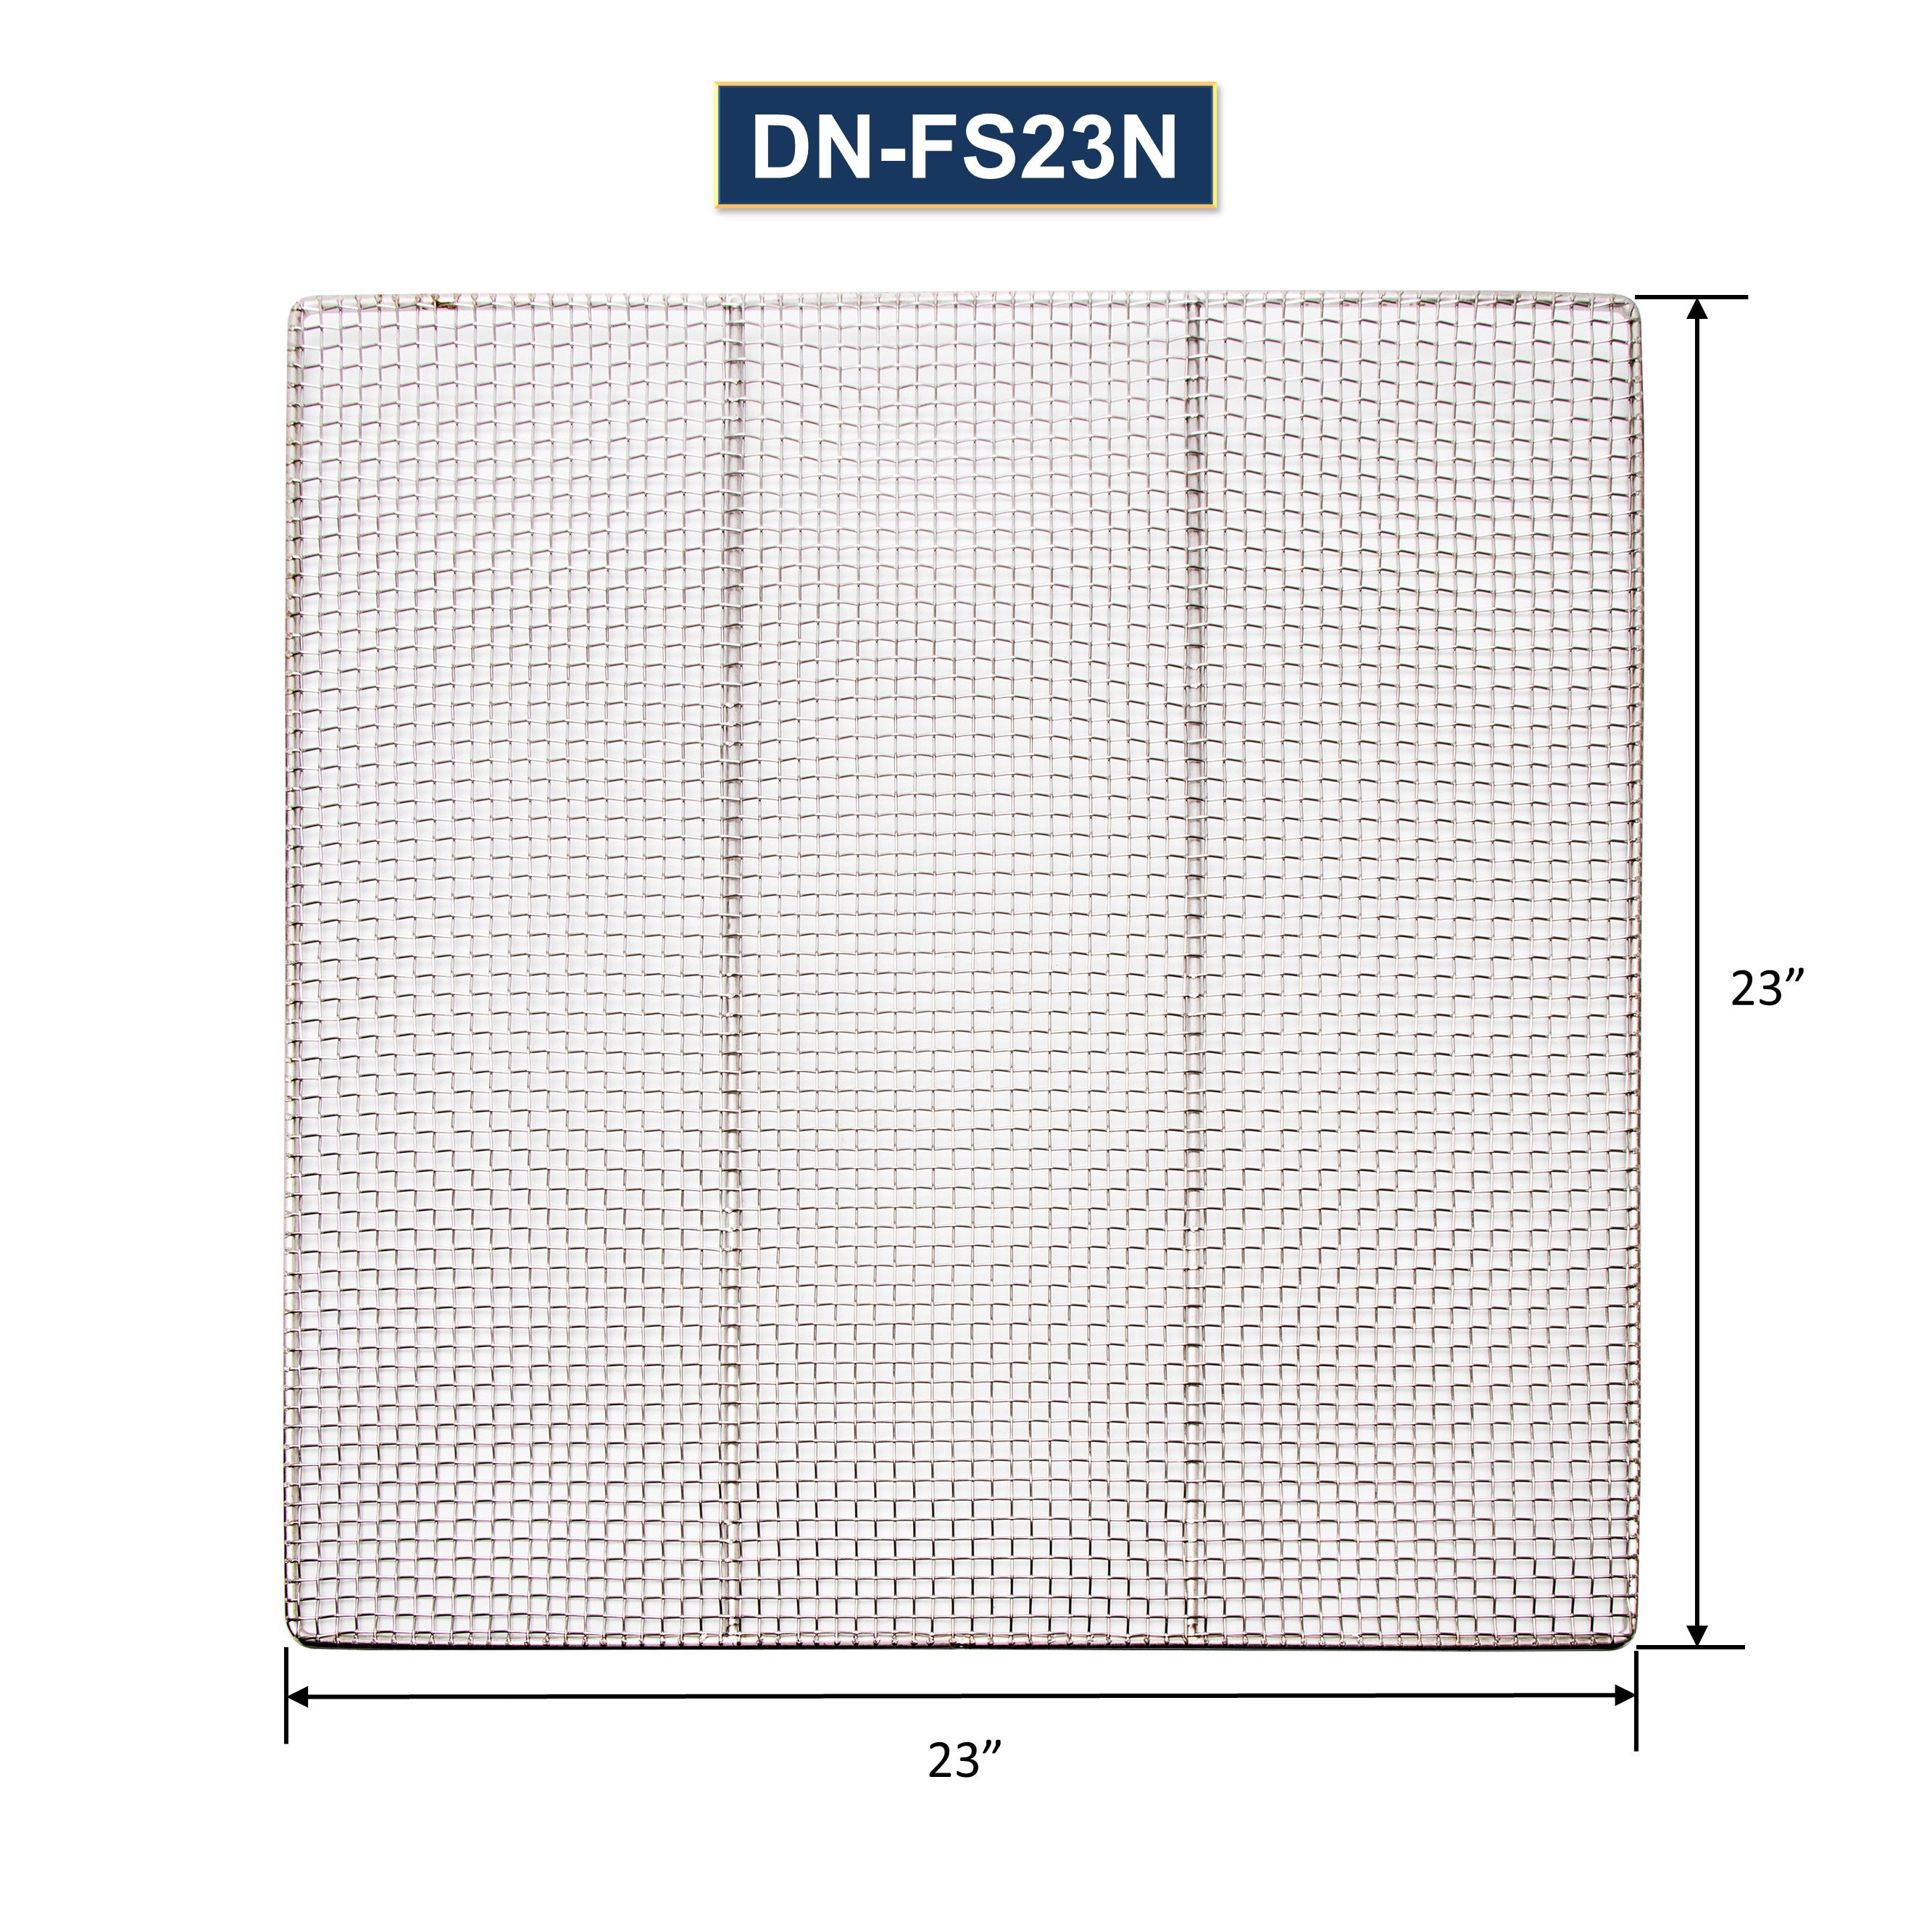 GSW 23" x 23" DN-FS23N Heavy Duty 16 Gauge 3-mesh Stainless Steel Woven Mesh Donut Frying Screen, 1/4"D Outer Frame and Support Rods